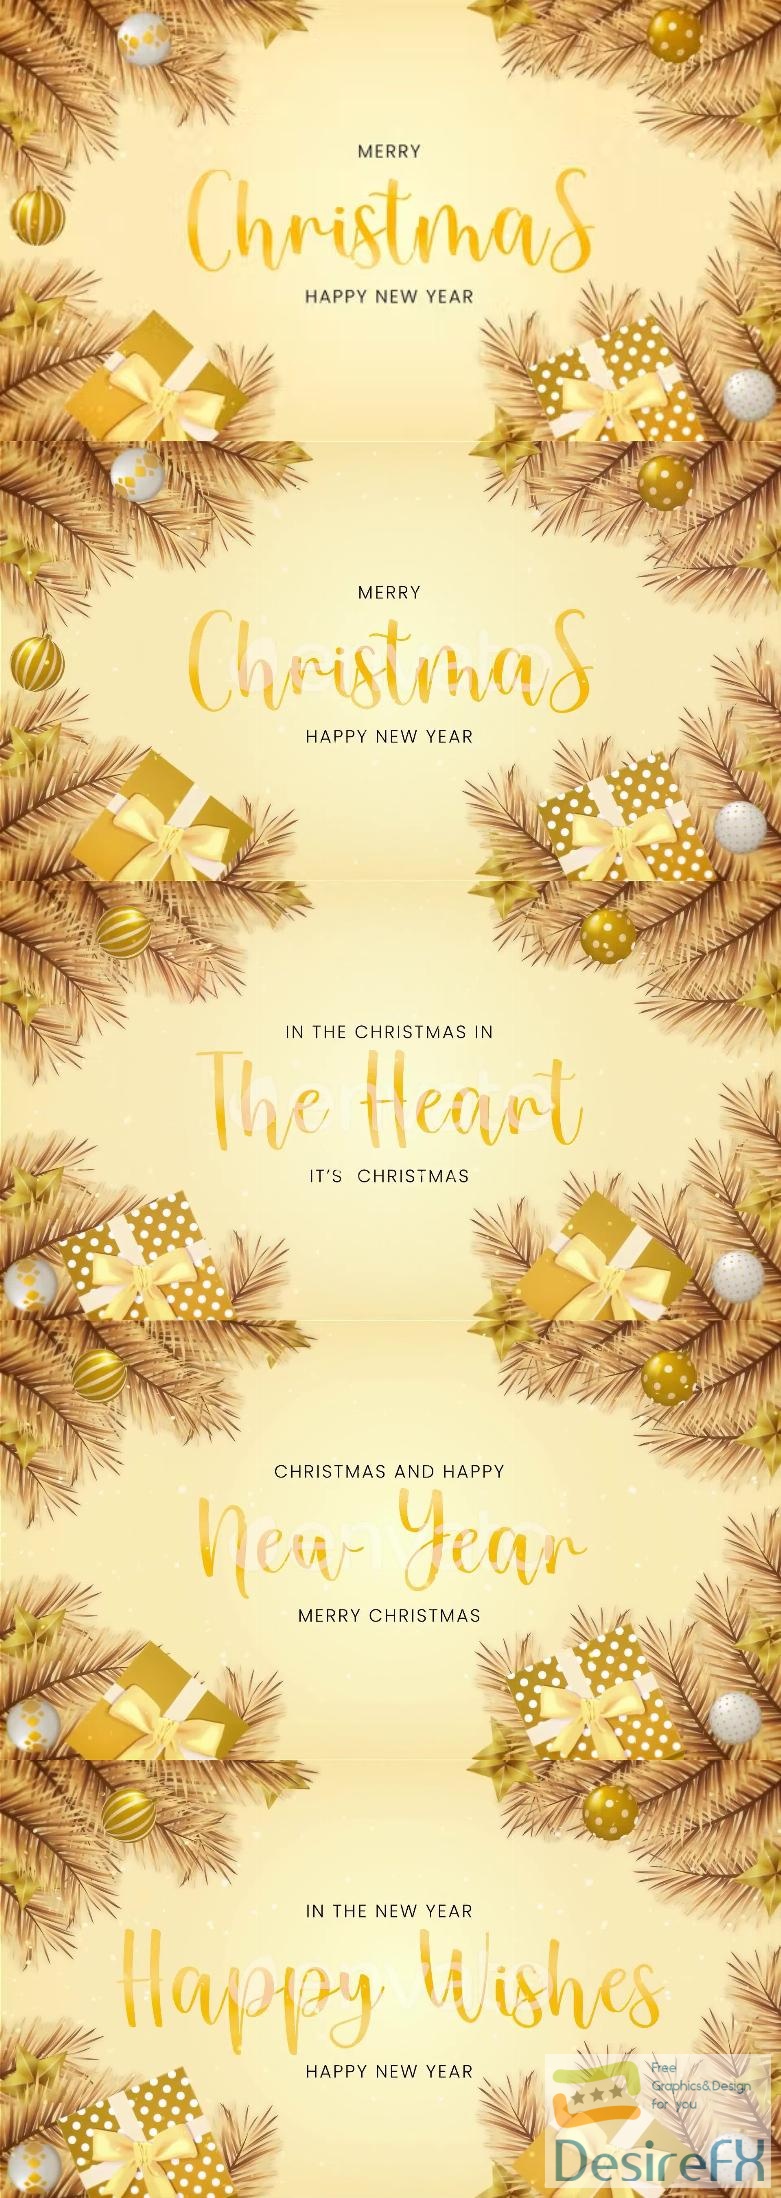 Videohive Merry Christmas Ident 41962298